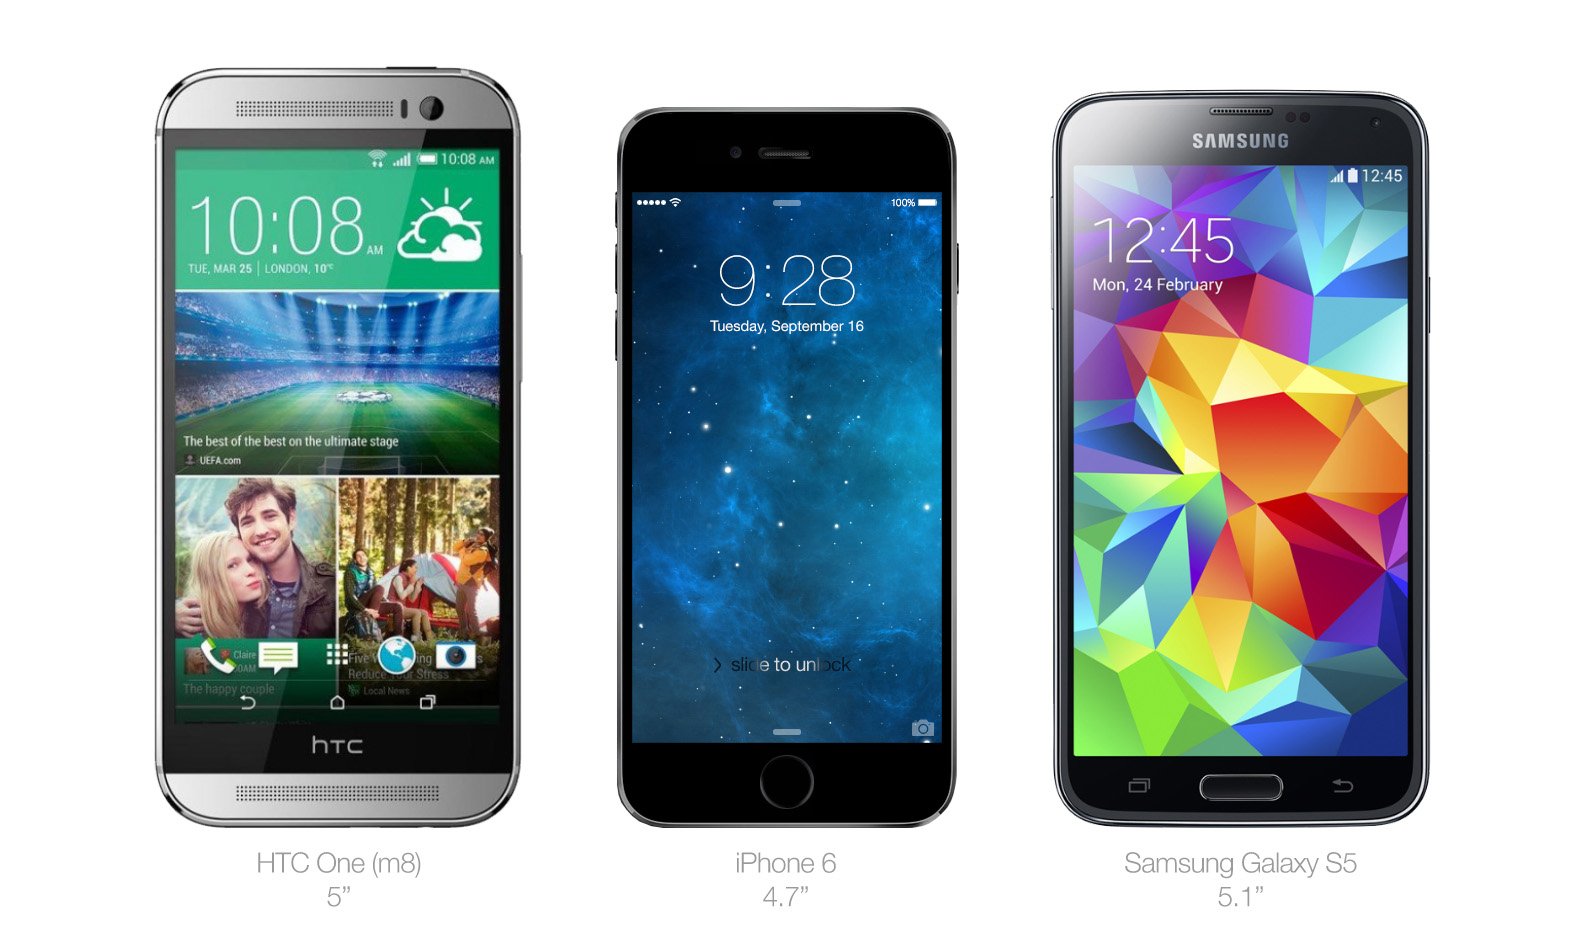 This is what an iPhone 6 could look like next to the Galaxy S5 and HTC One M8.